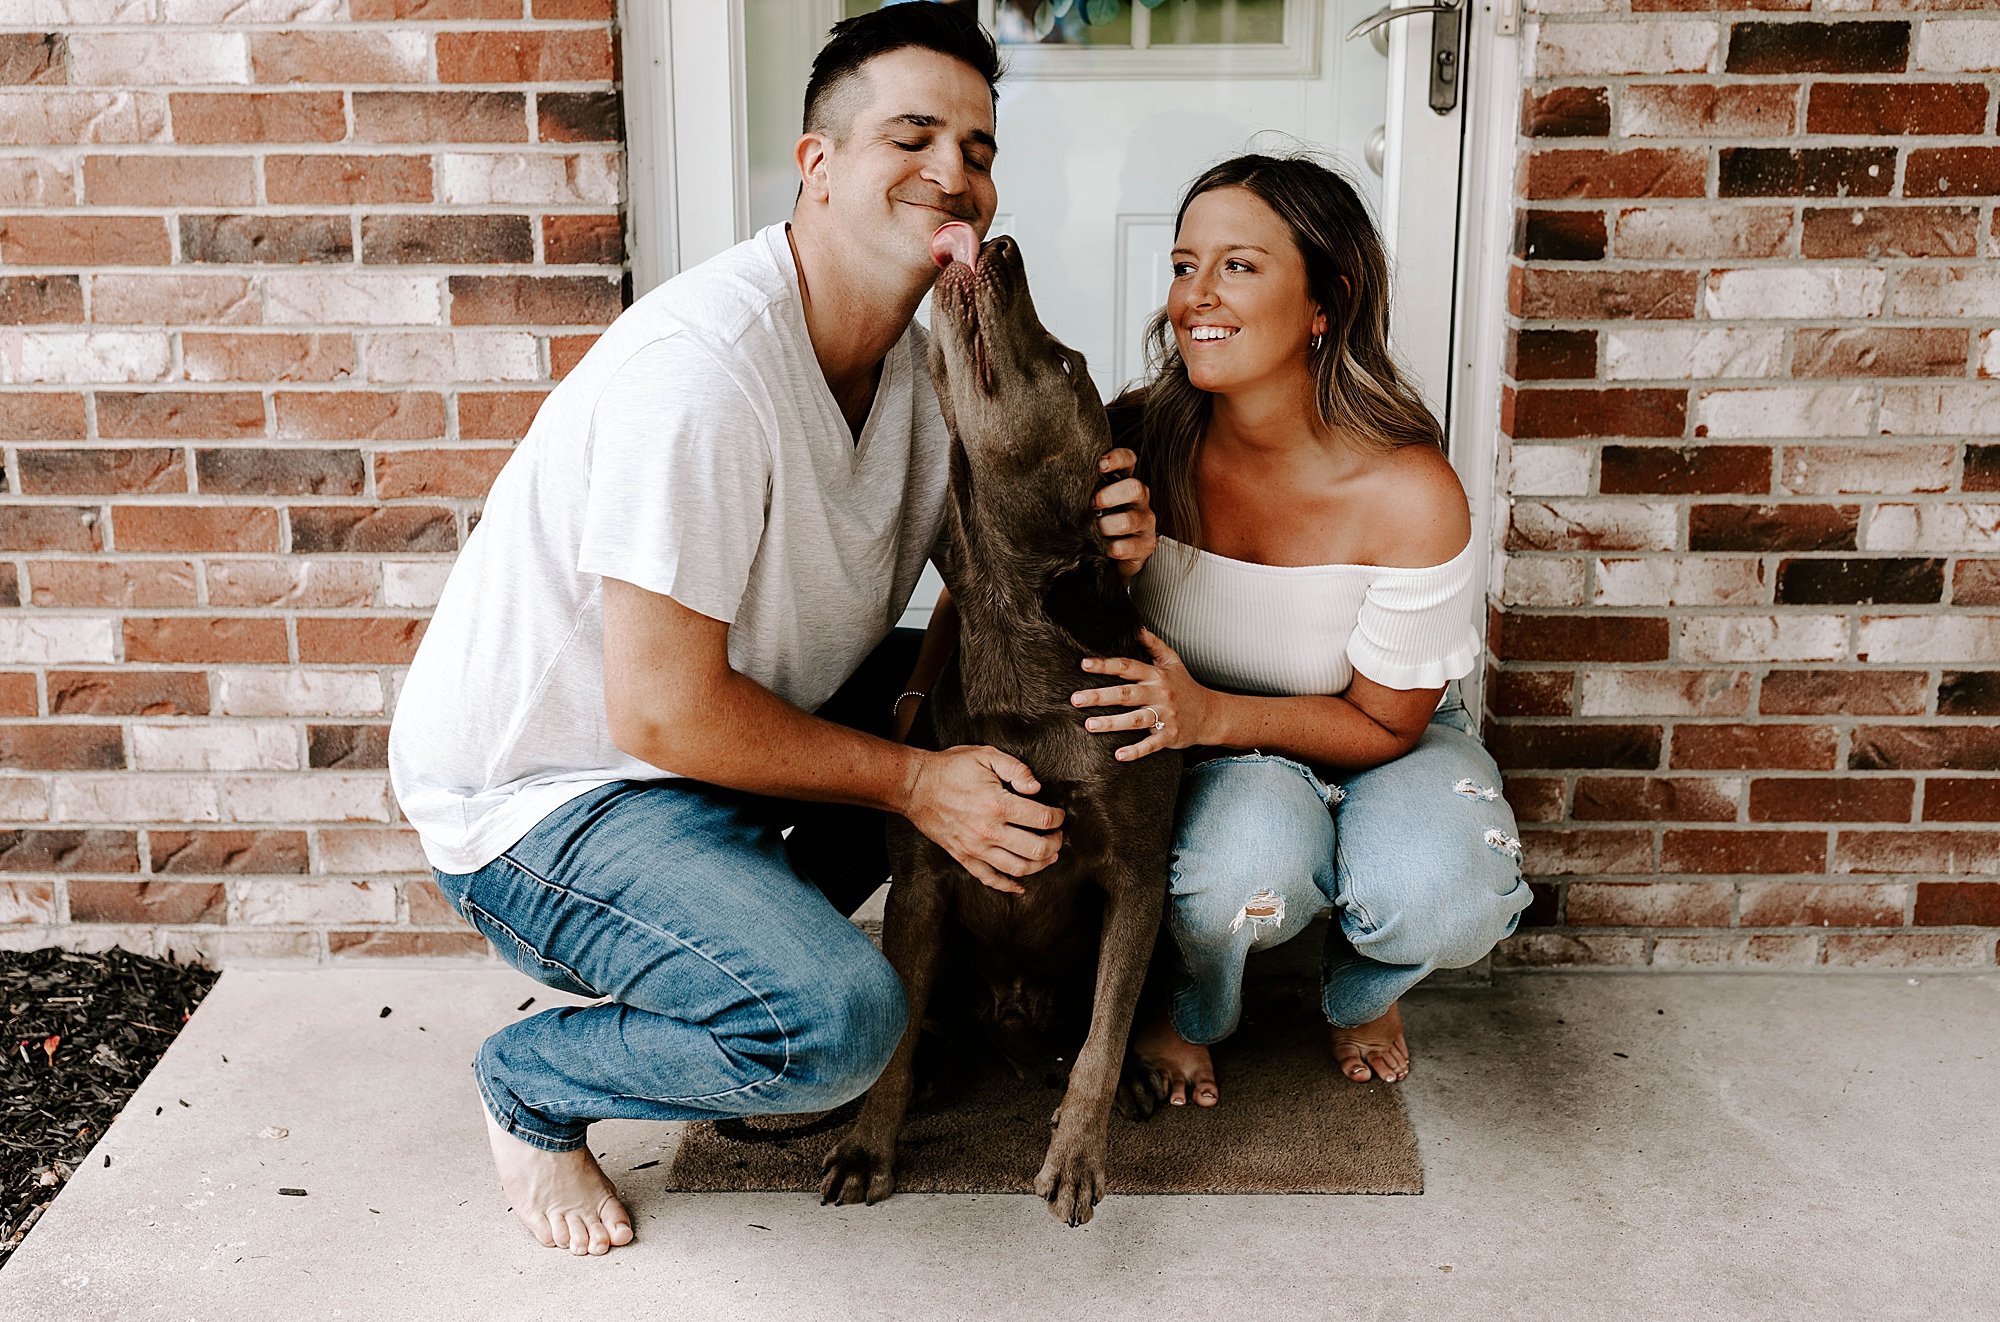 engagement photos with pets